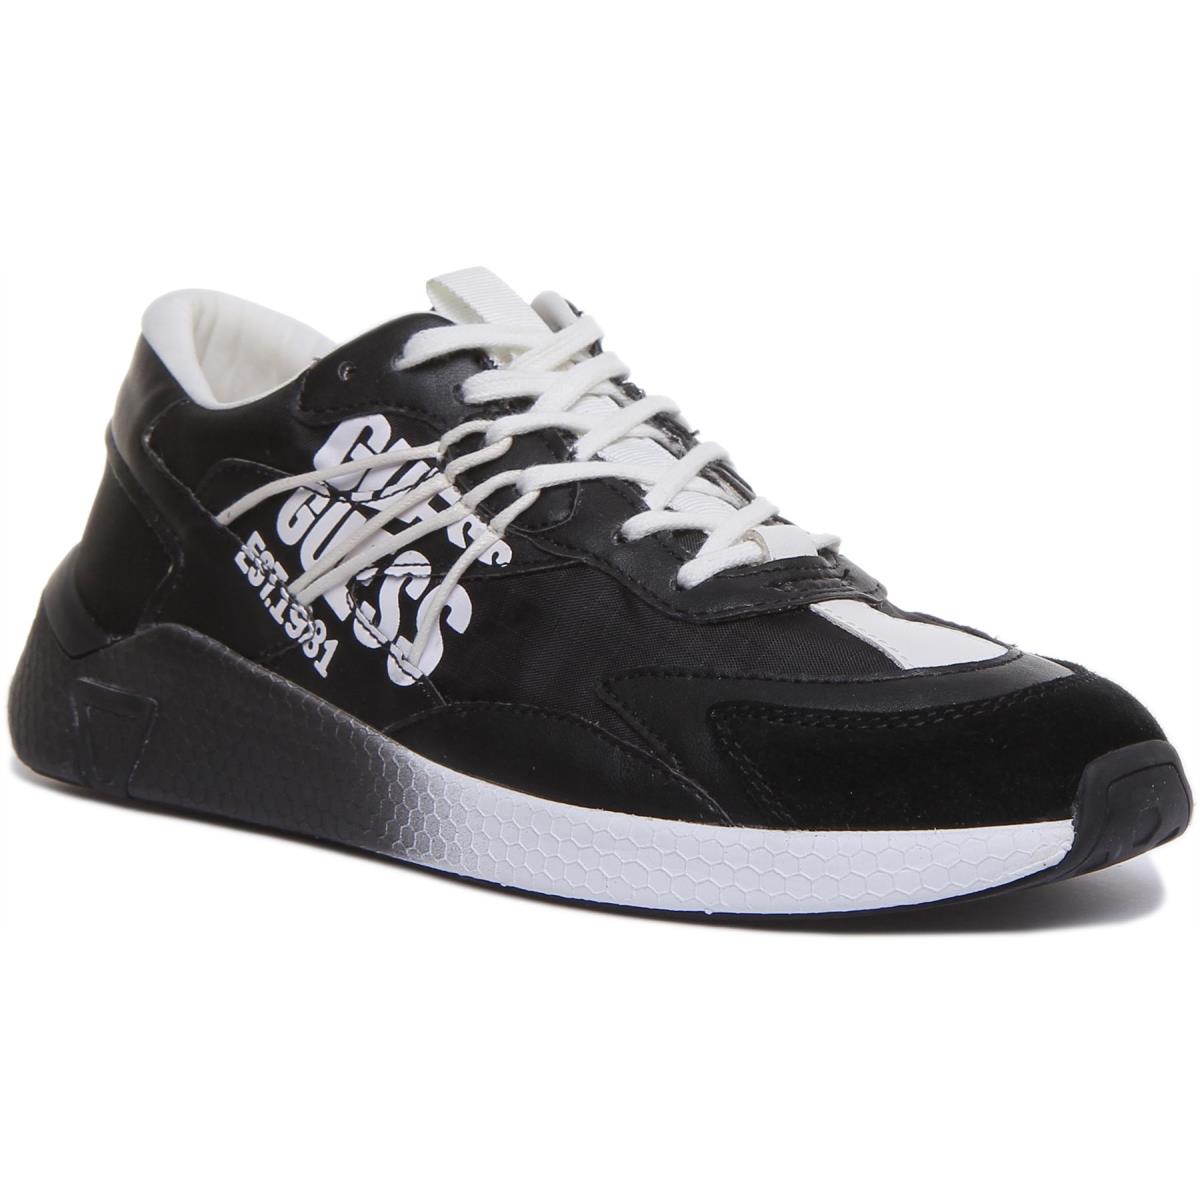 Guess Fm5Moafab1 Black White Modena Active Lace Up Casual Trainer Size US 7 - 13 BLACK WHITE